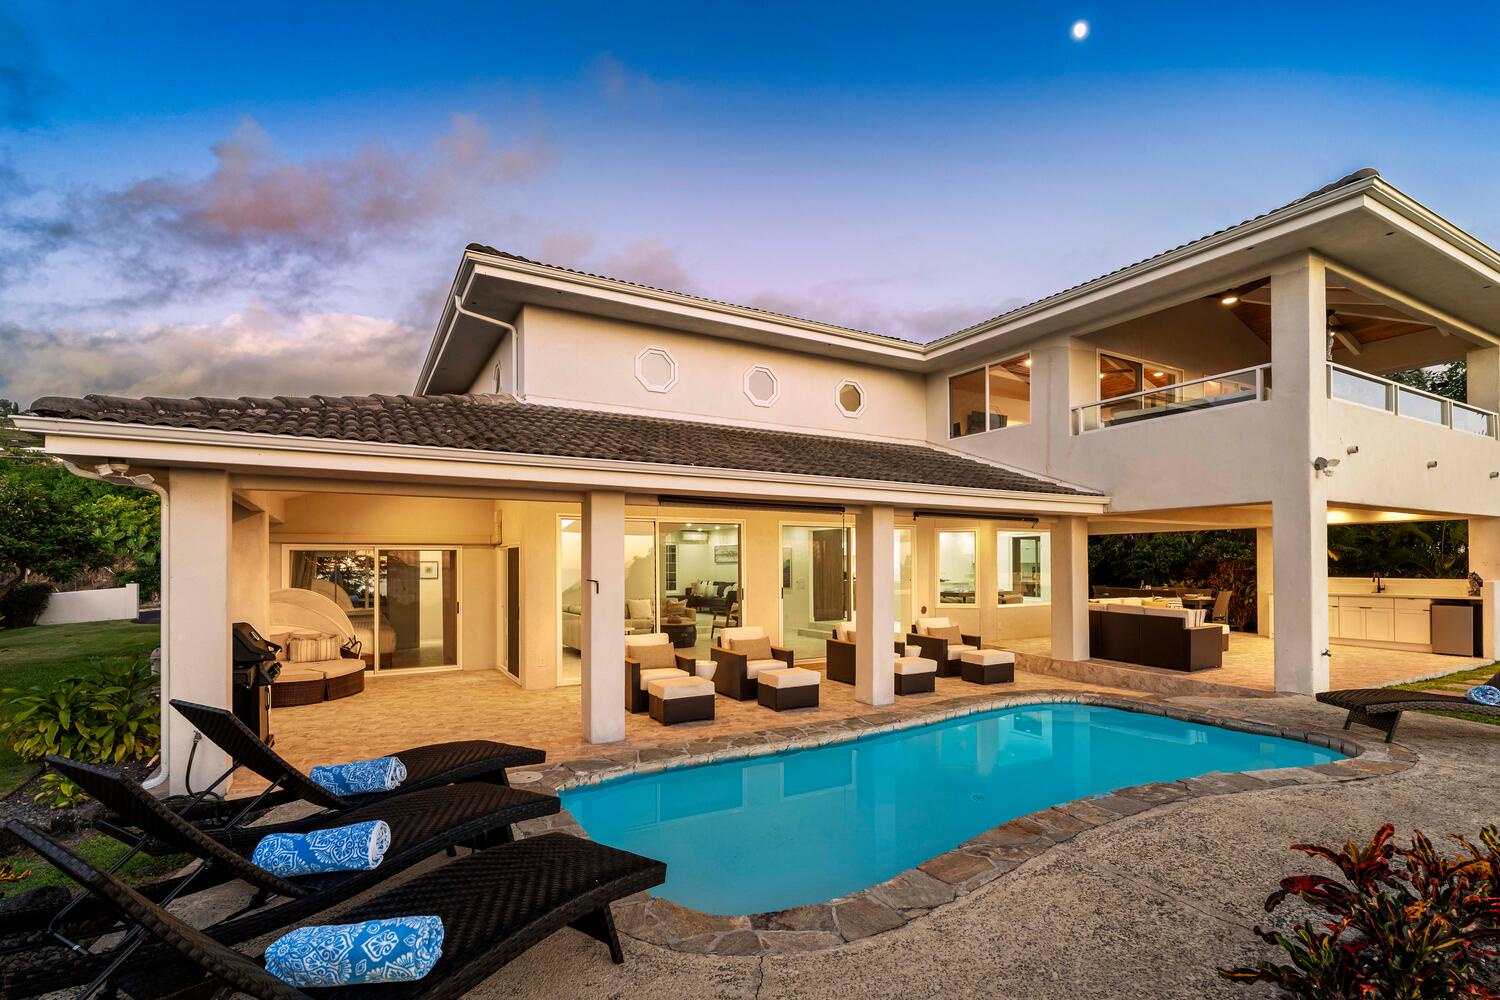 Kailua Kona Vacation Rentals, Ho'okipa Hale - Embrace the luxury of this tranquil outdoor setting, perfect for evening swims under a pastel sky.